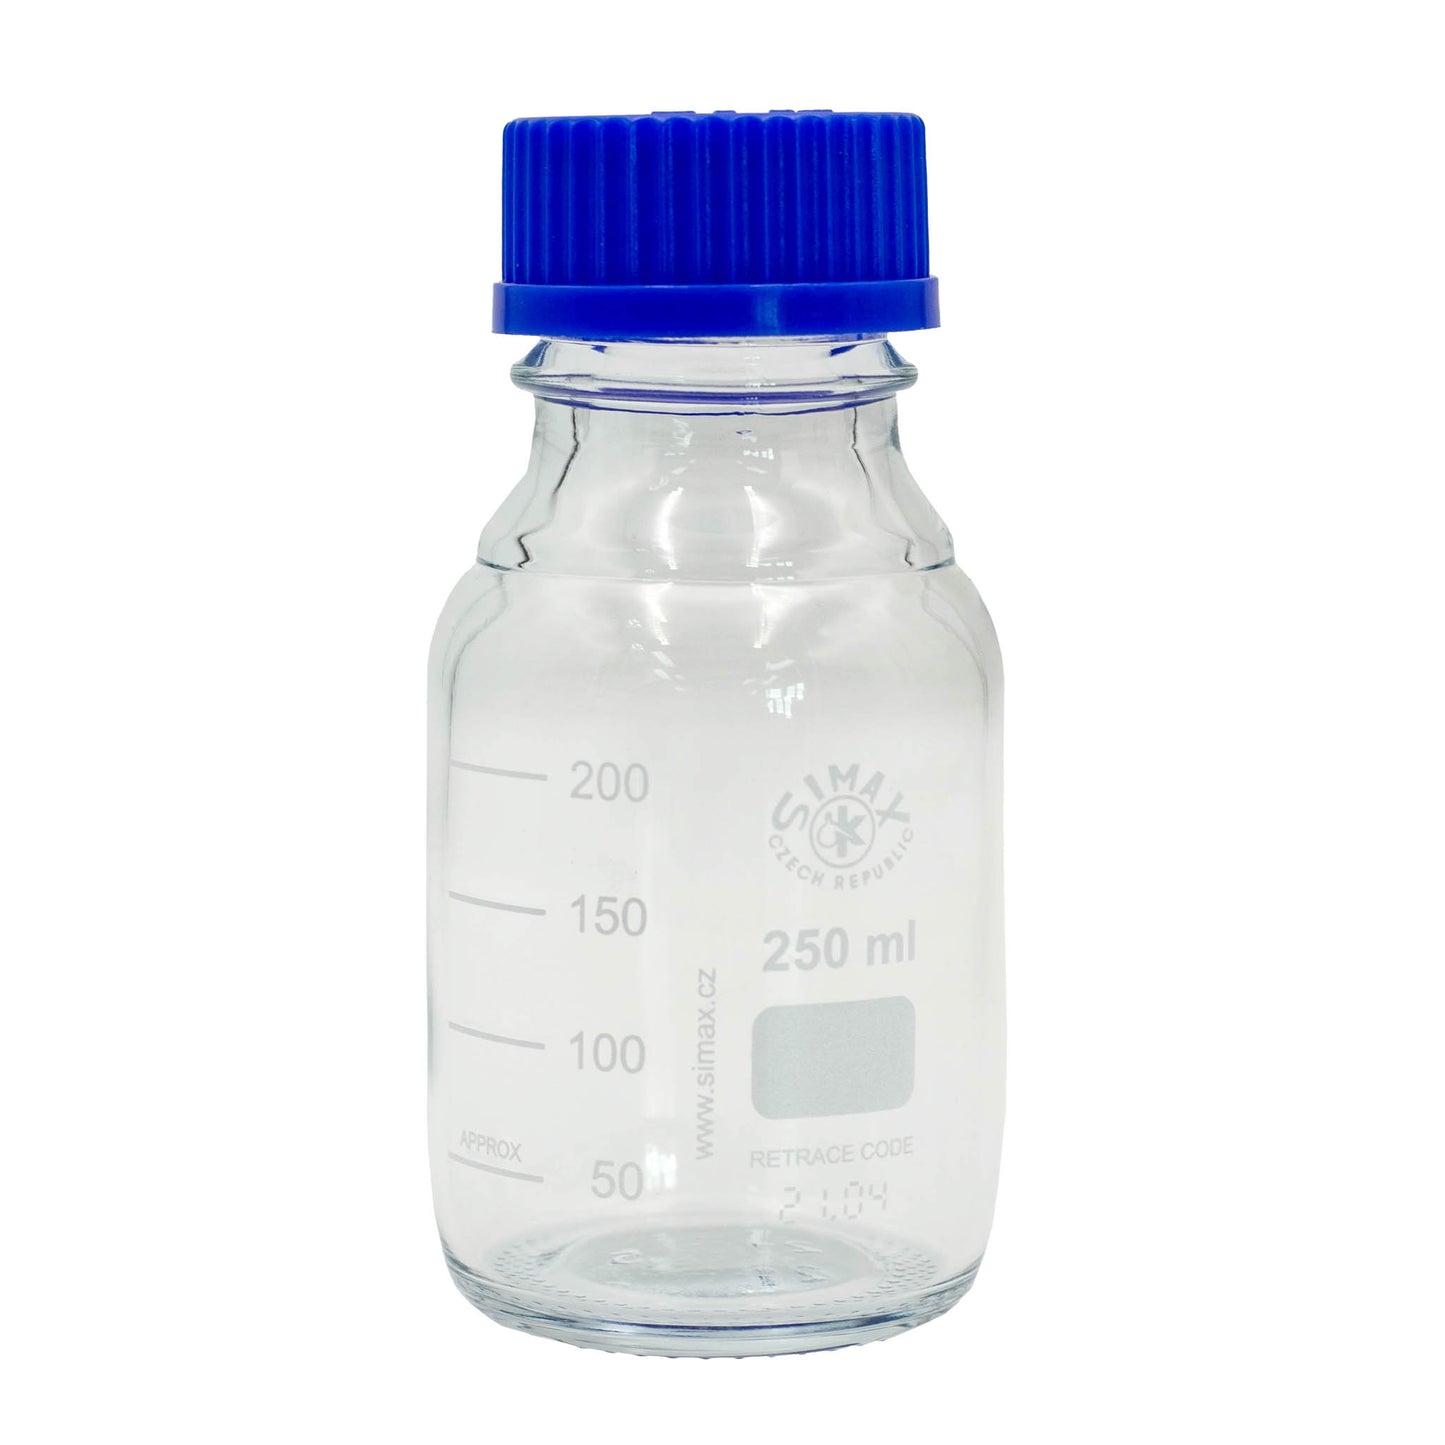 250ml borosilicate lab bottle with lid. Made with silica and boron trioxide making them more resistant to thermal shock than any other common glass.